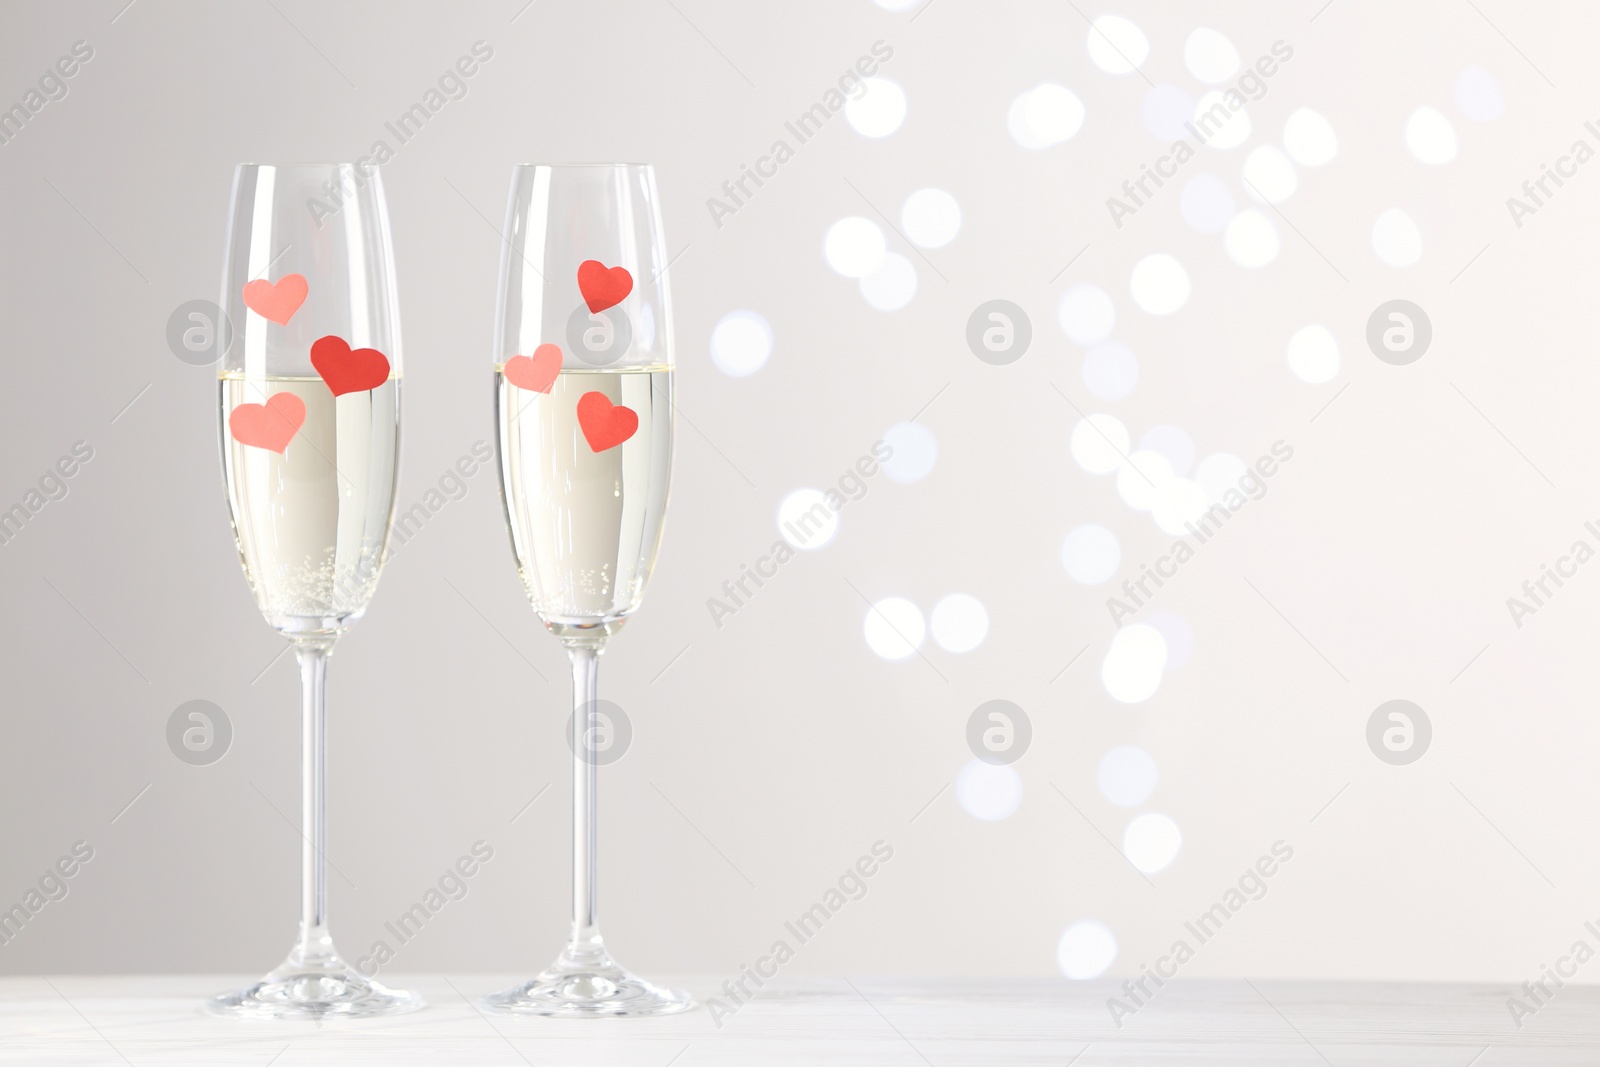 Photo of Glasses of champagne with paper hearts on white table against blurred lights. Space for text